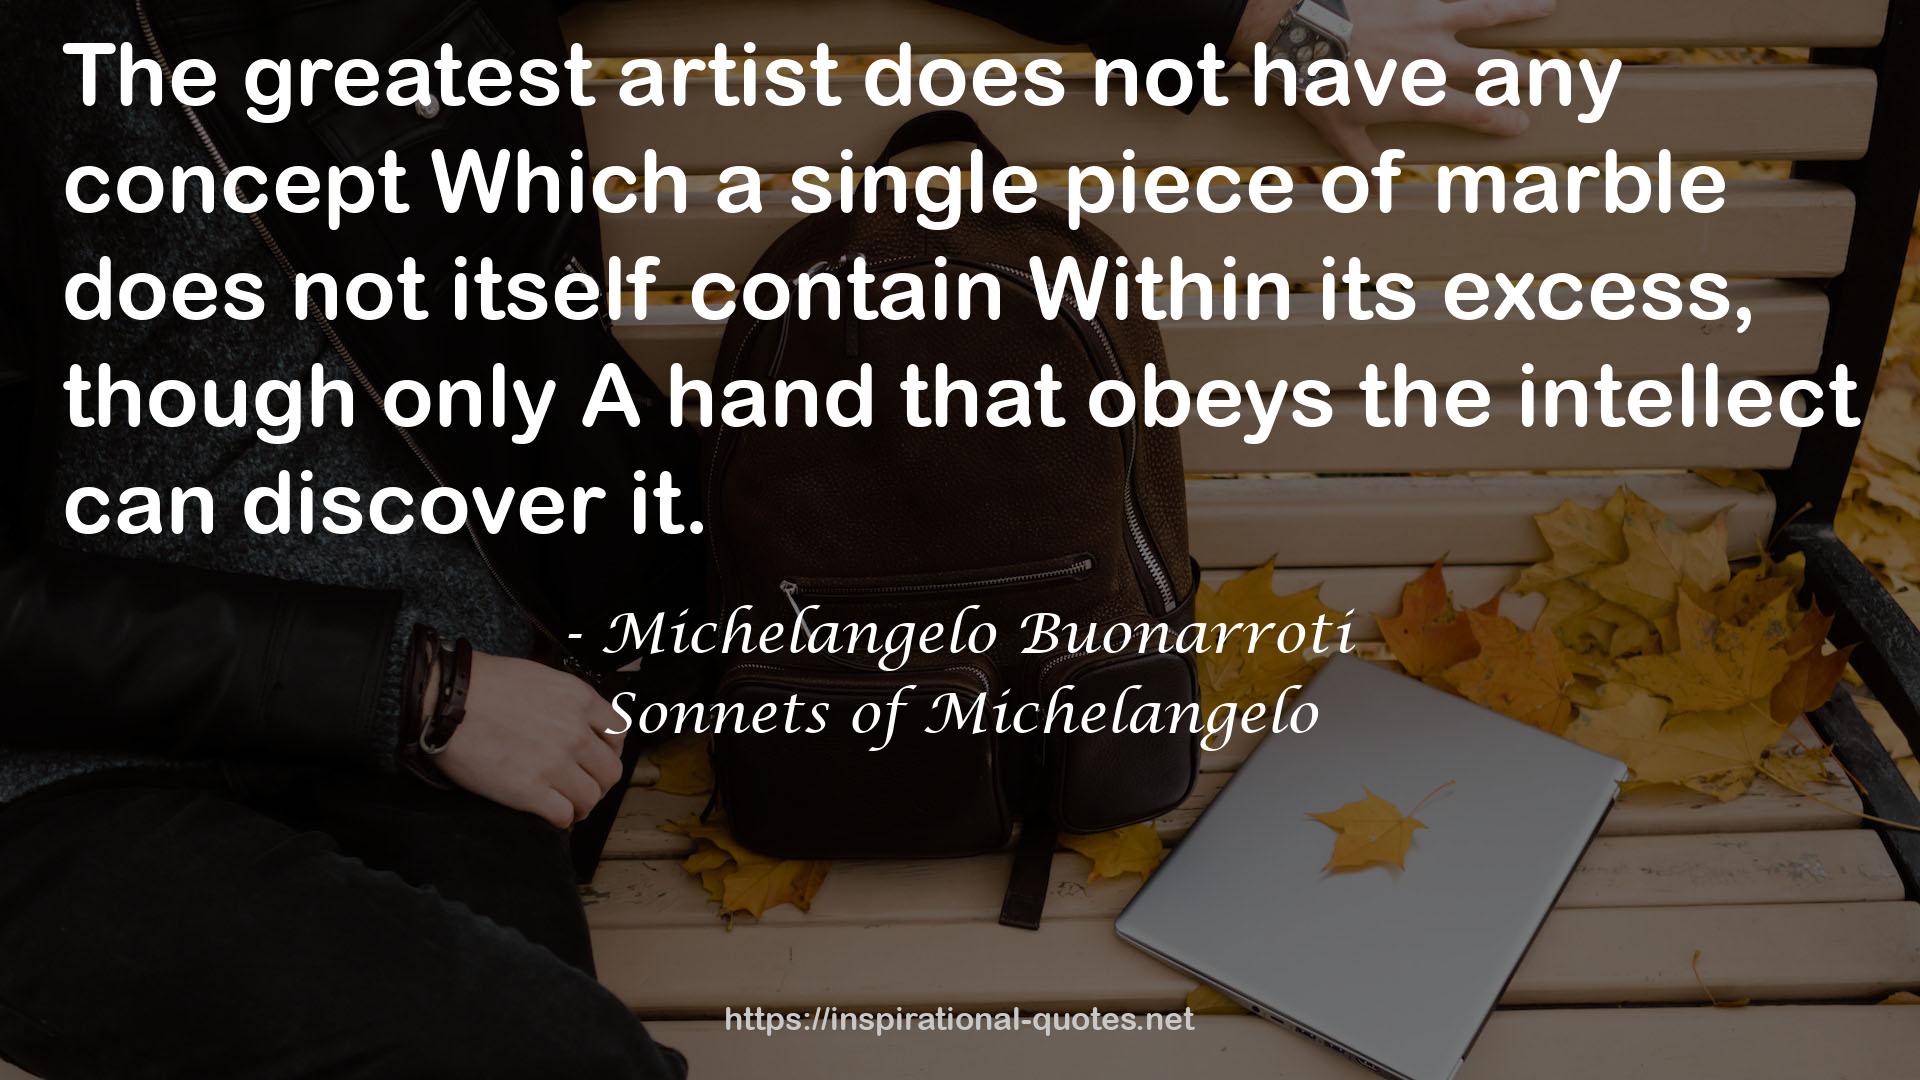 Sonnets of Michelangelo QUOTES